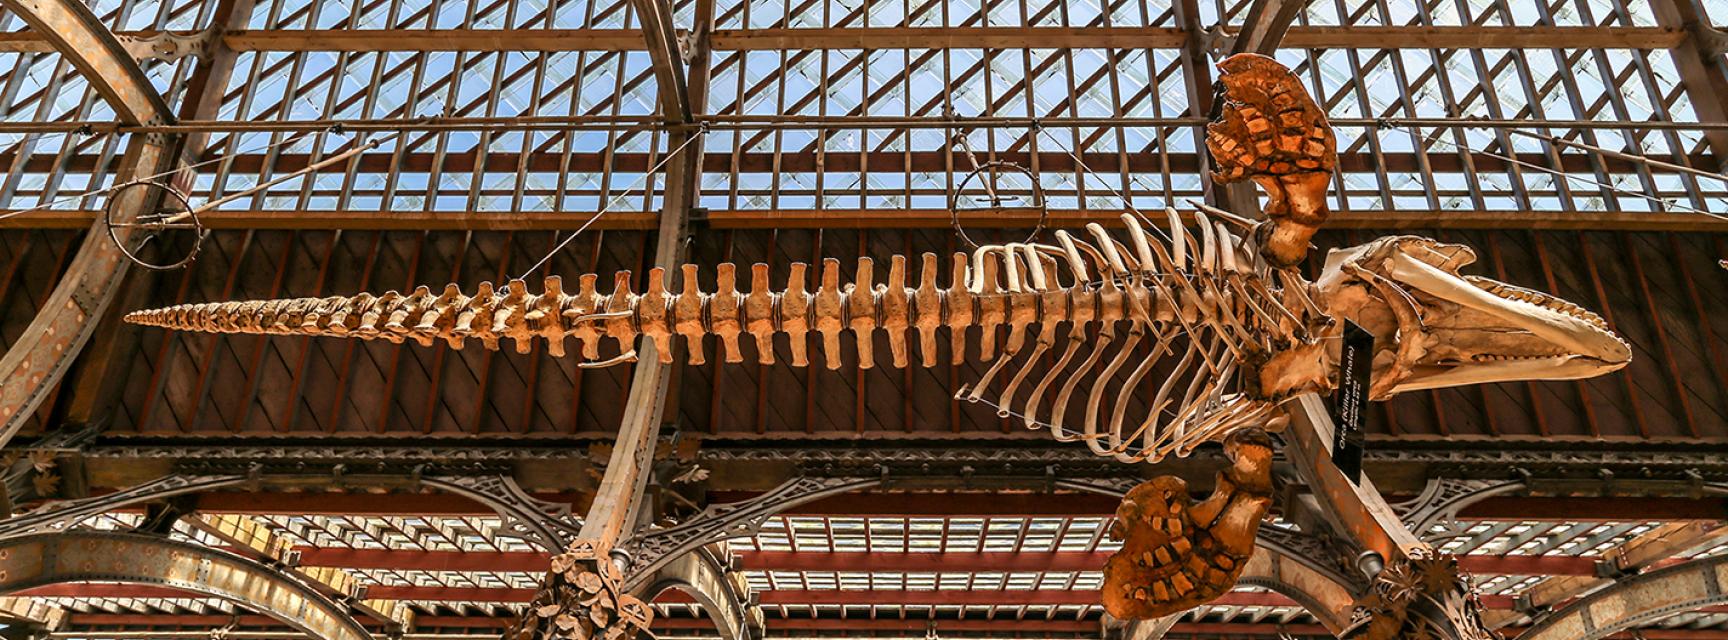 Killer whale (Orcinus orca) suspended skeleton, photographed from below